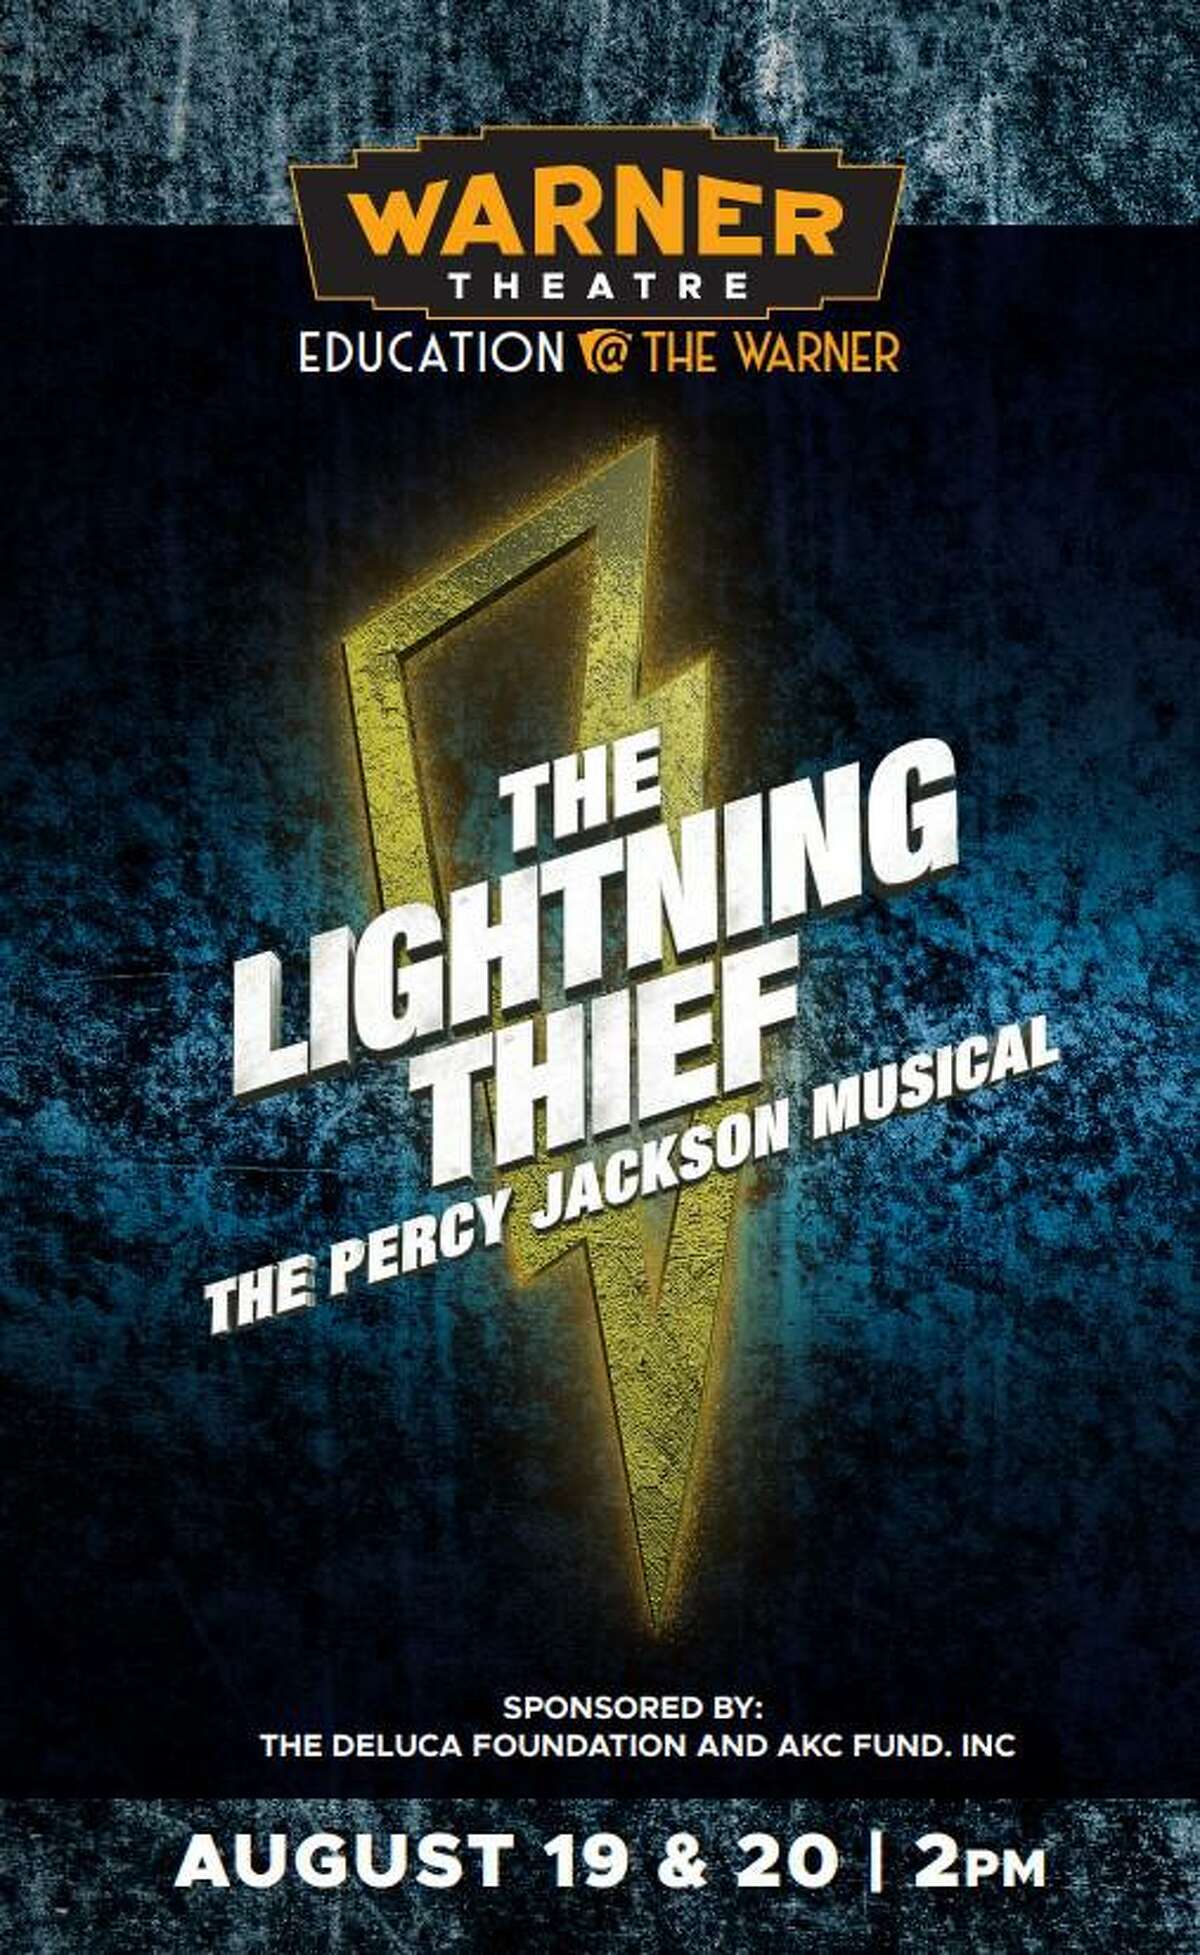 The Warner Theatre's participation in the Aug. 20 Litchfield Hills Creative Festival includes live music and live performances of the theater's education department's show, "The Lightning Thief: The Percy Jackson Musical."